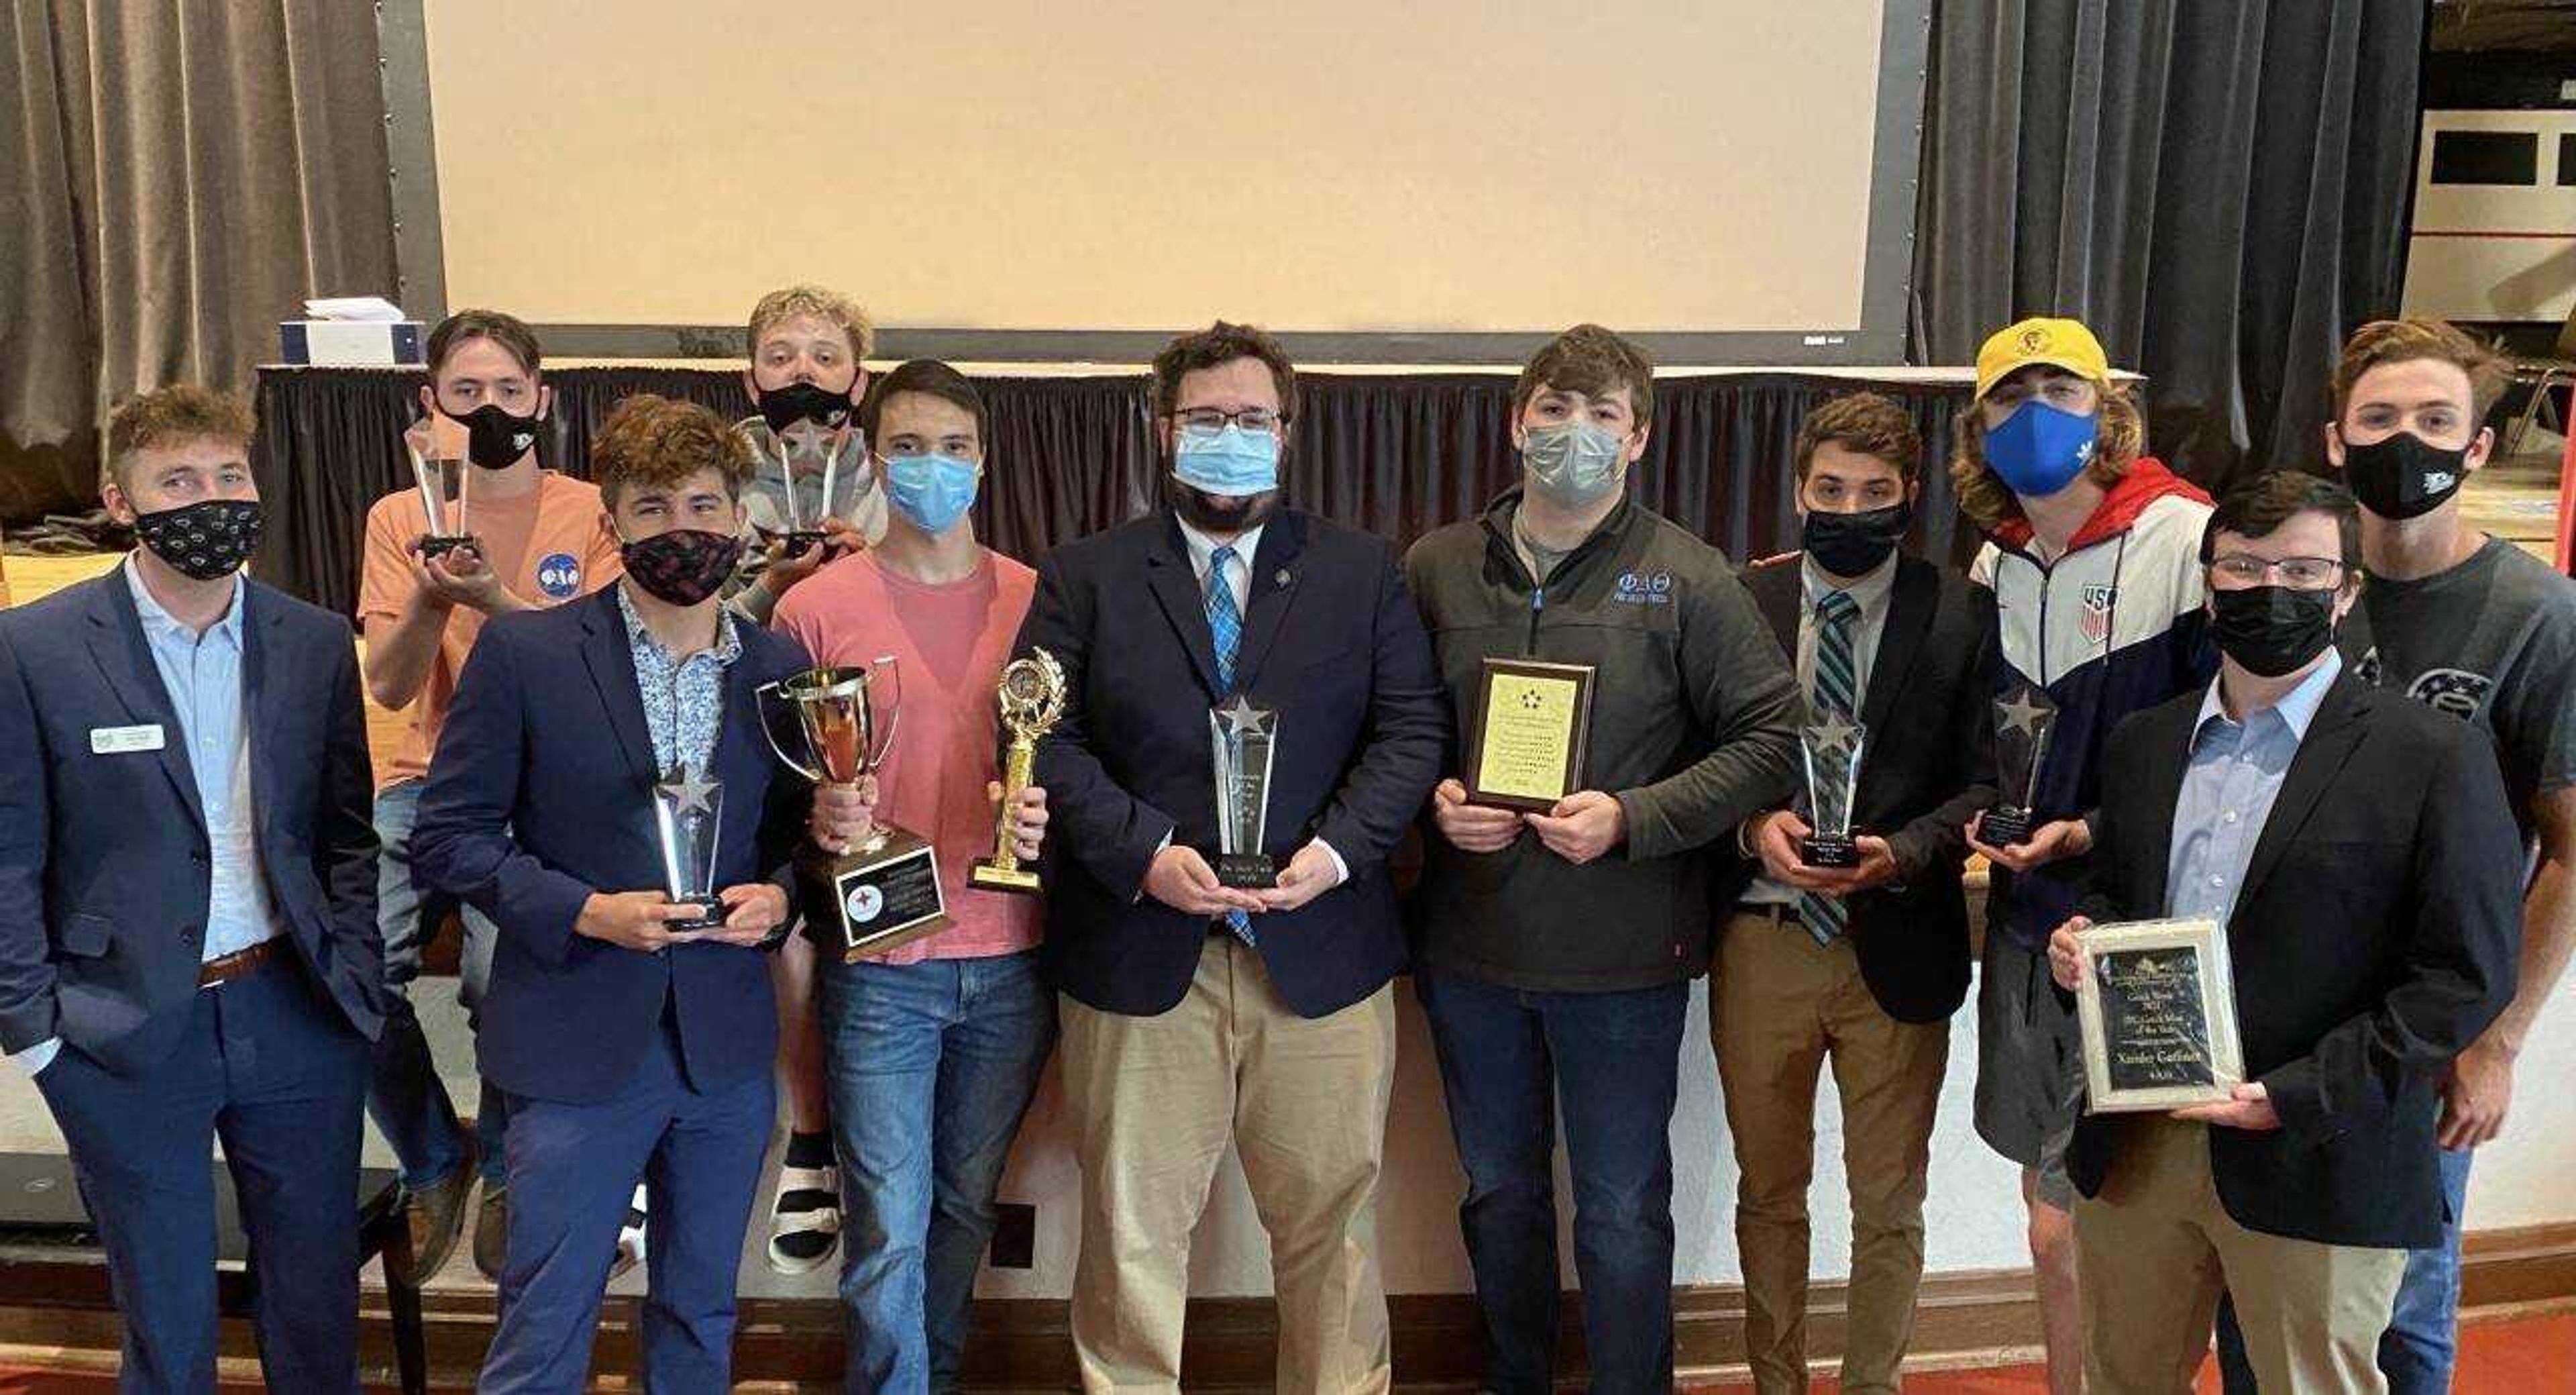 Phi Delta Theta members after being named the Fraternity of the Year at the award ceremony on April 18th. In the center is Alex Younkins holding the award.